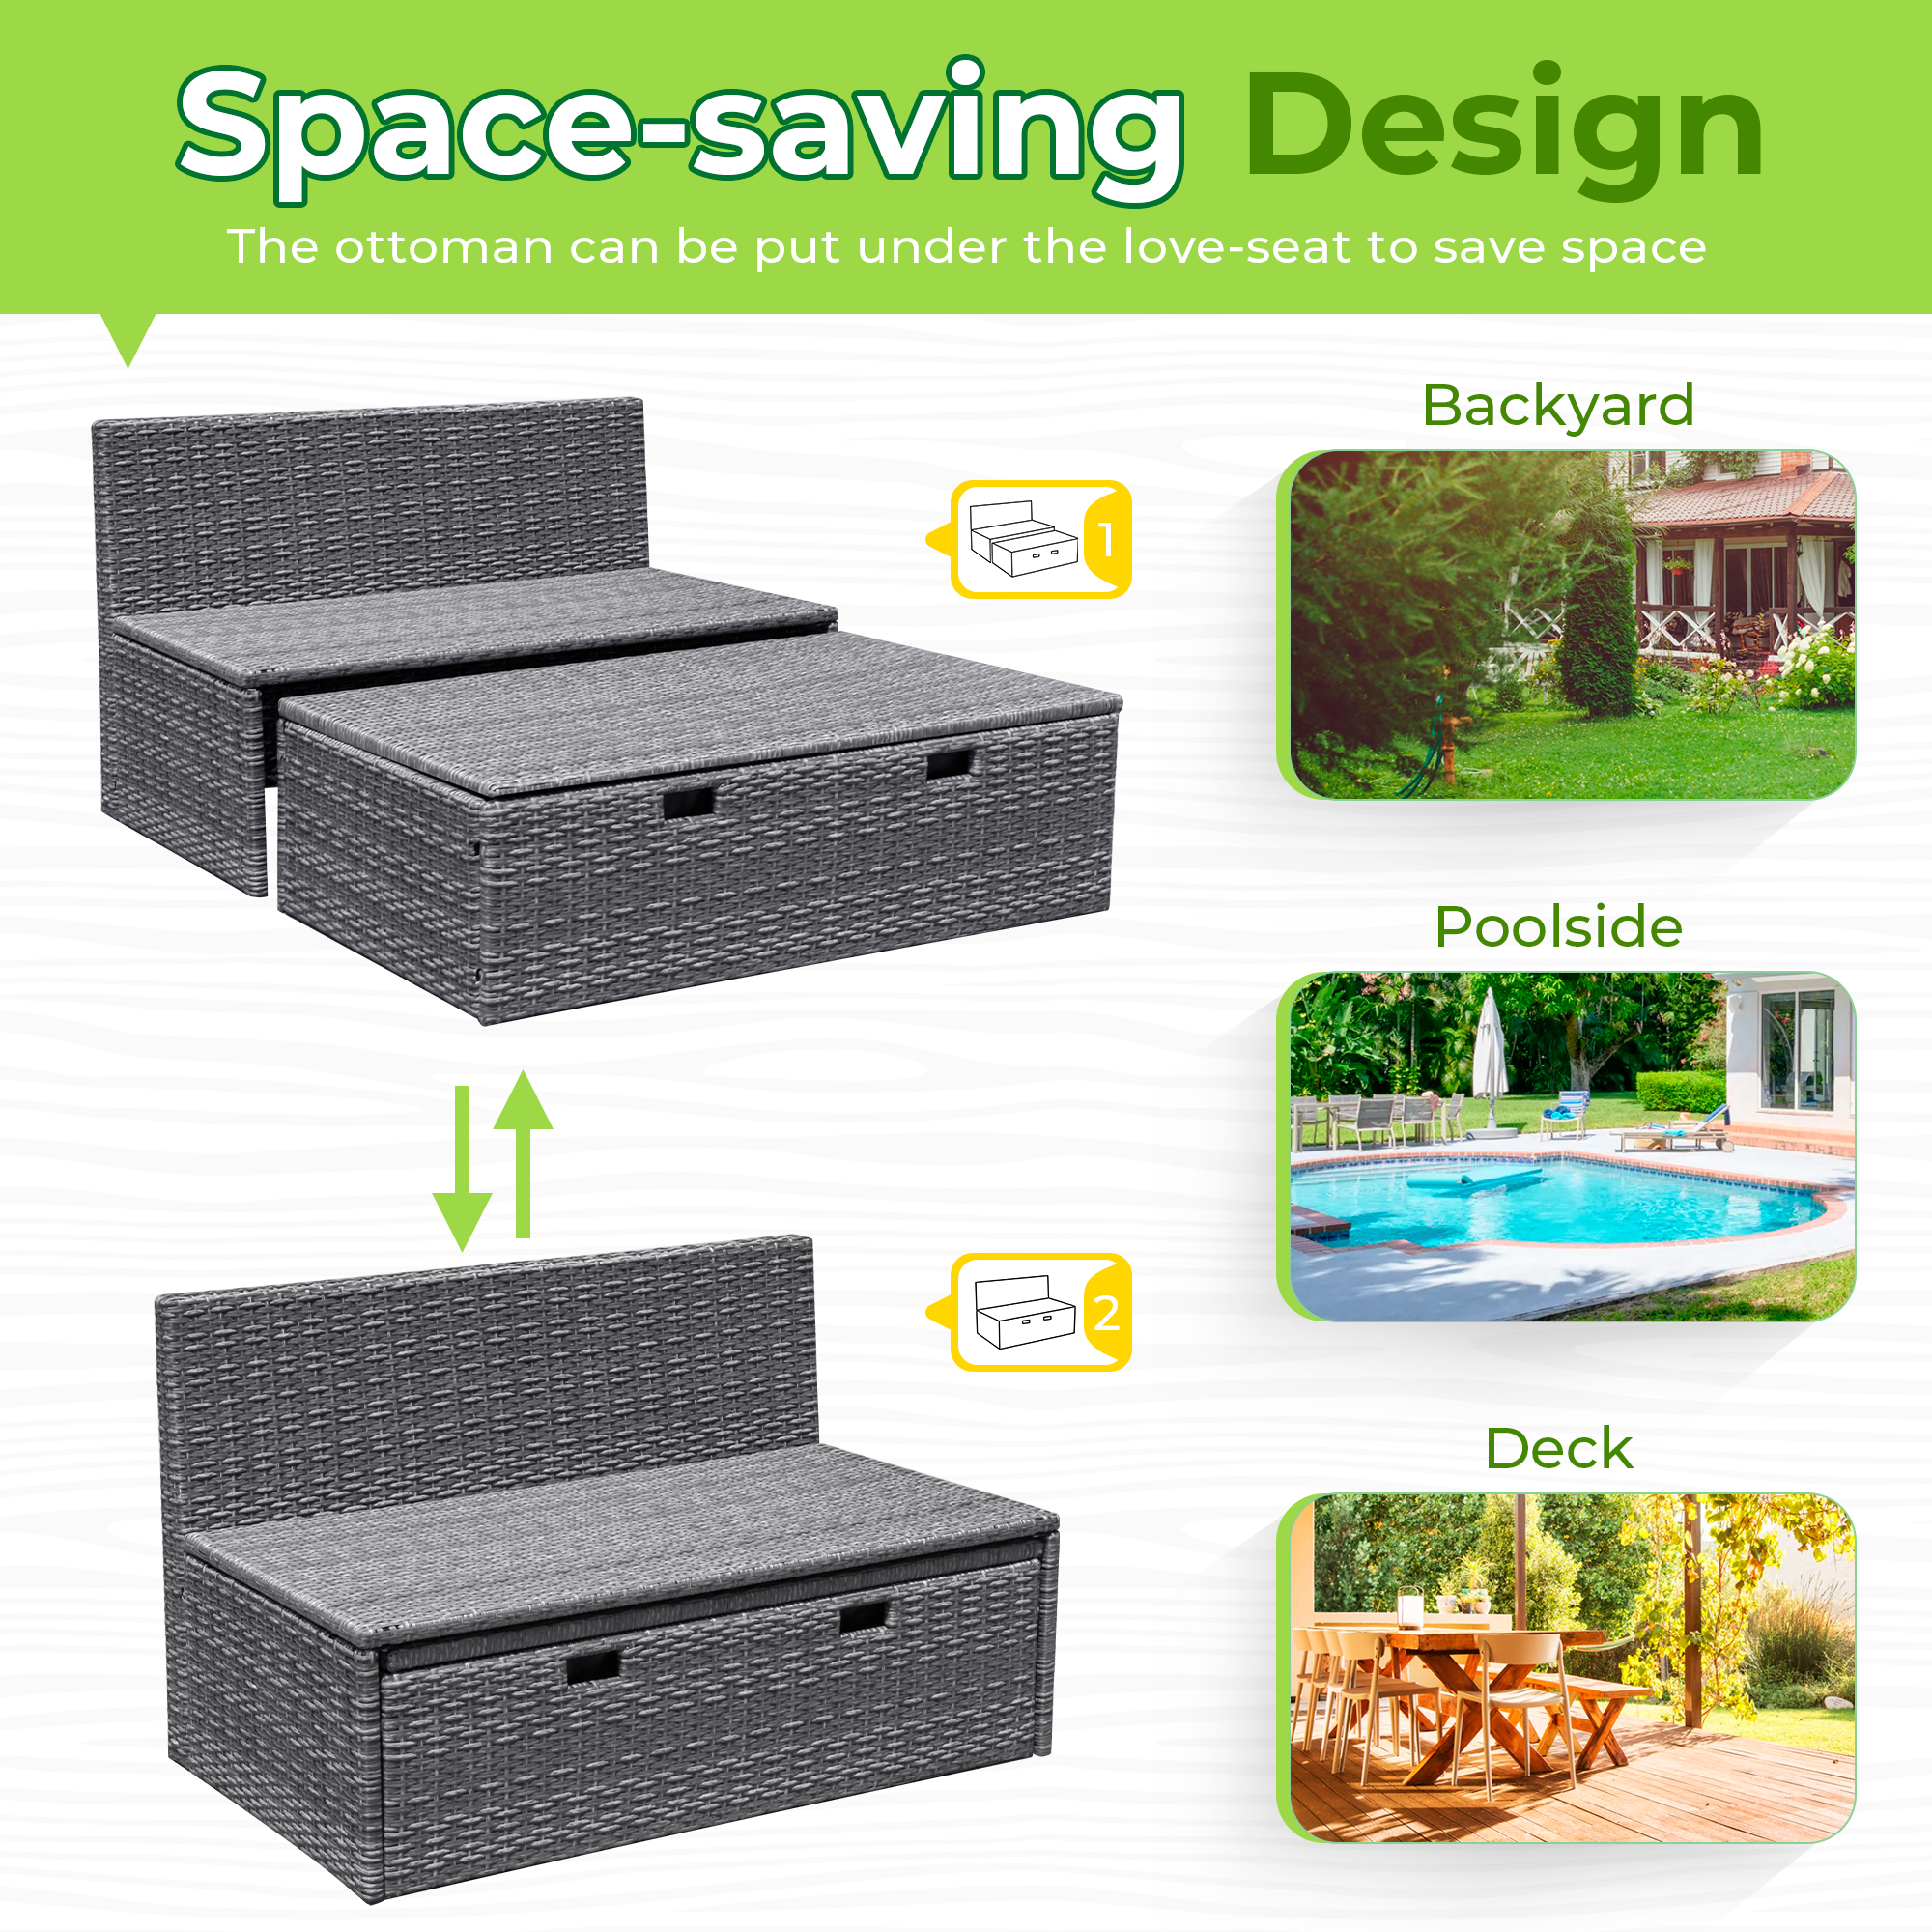 Homall Outdoor Daybed Patio Furniture Set Rattan Storage Daybed with Cushion and Side Table, Gray - image 3 of 8